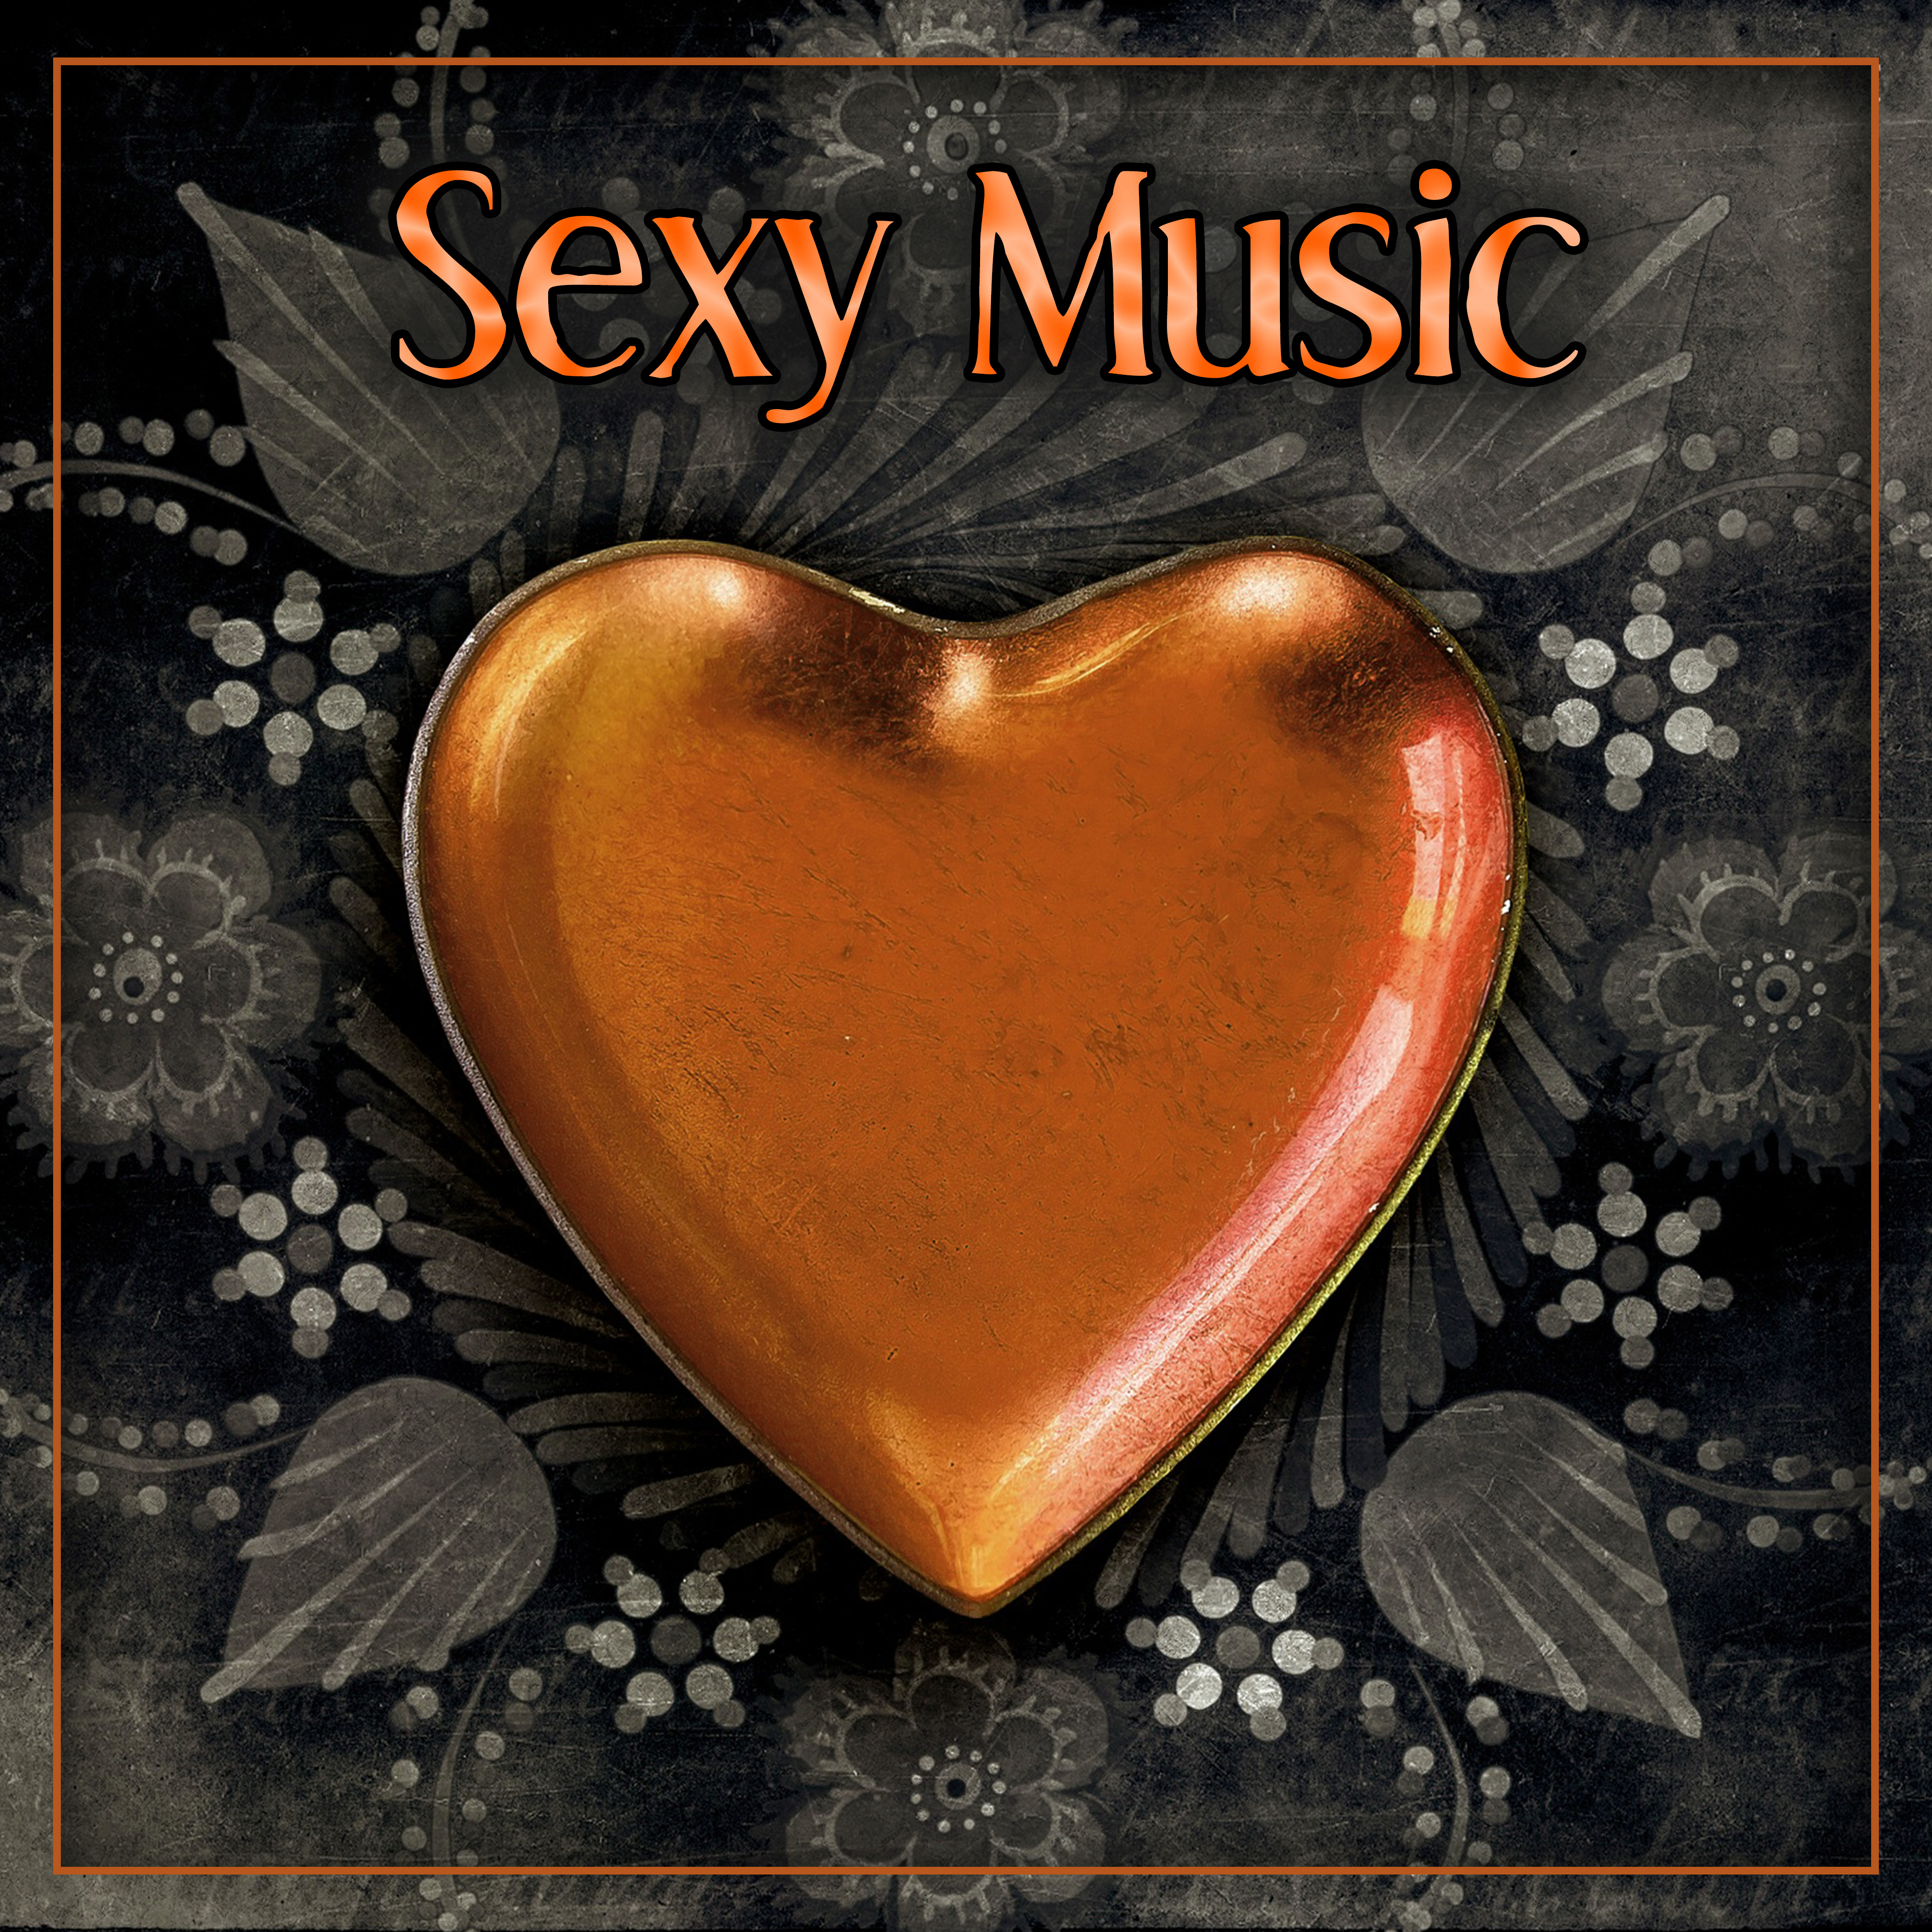 **** Music – Sensual Piano Jazz, Beautiful Background Music for Lovers, Smooth Jazz